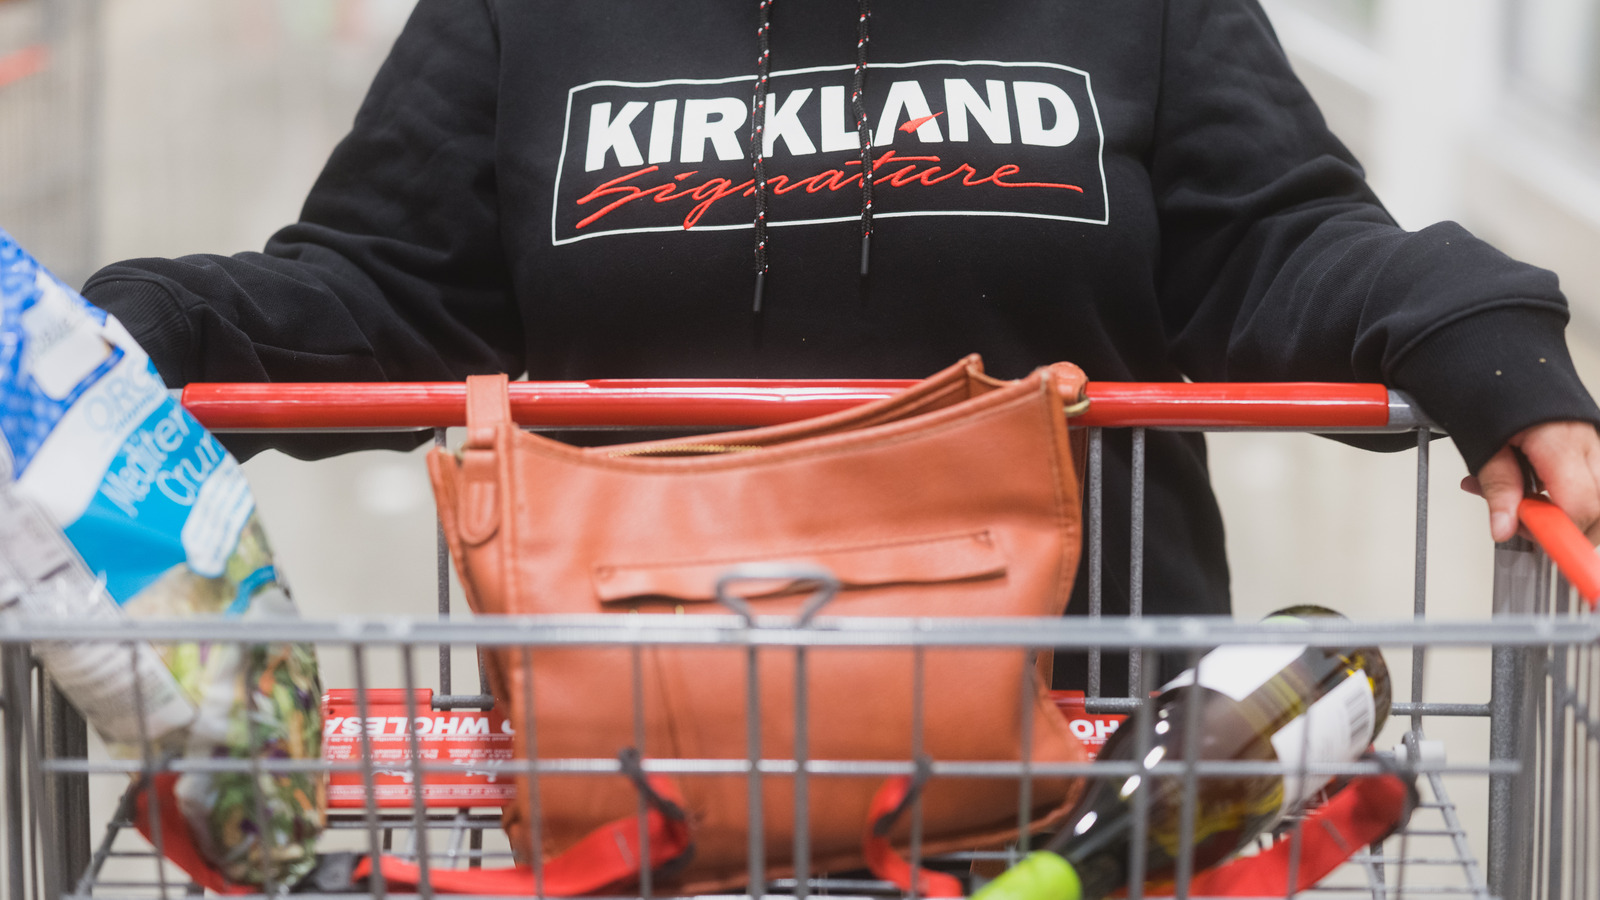 10 Costco Kirkland Products That Are Better Than the Brand Name